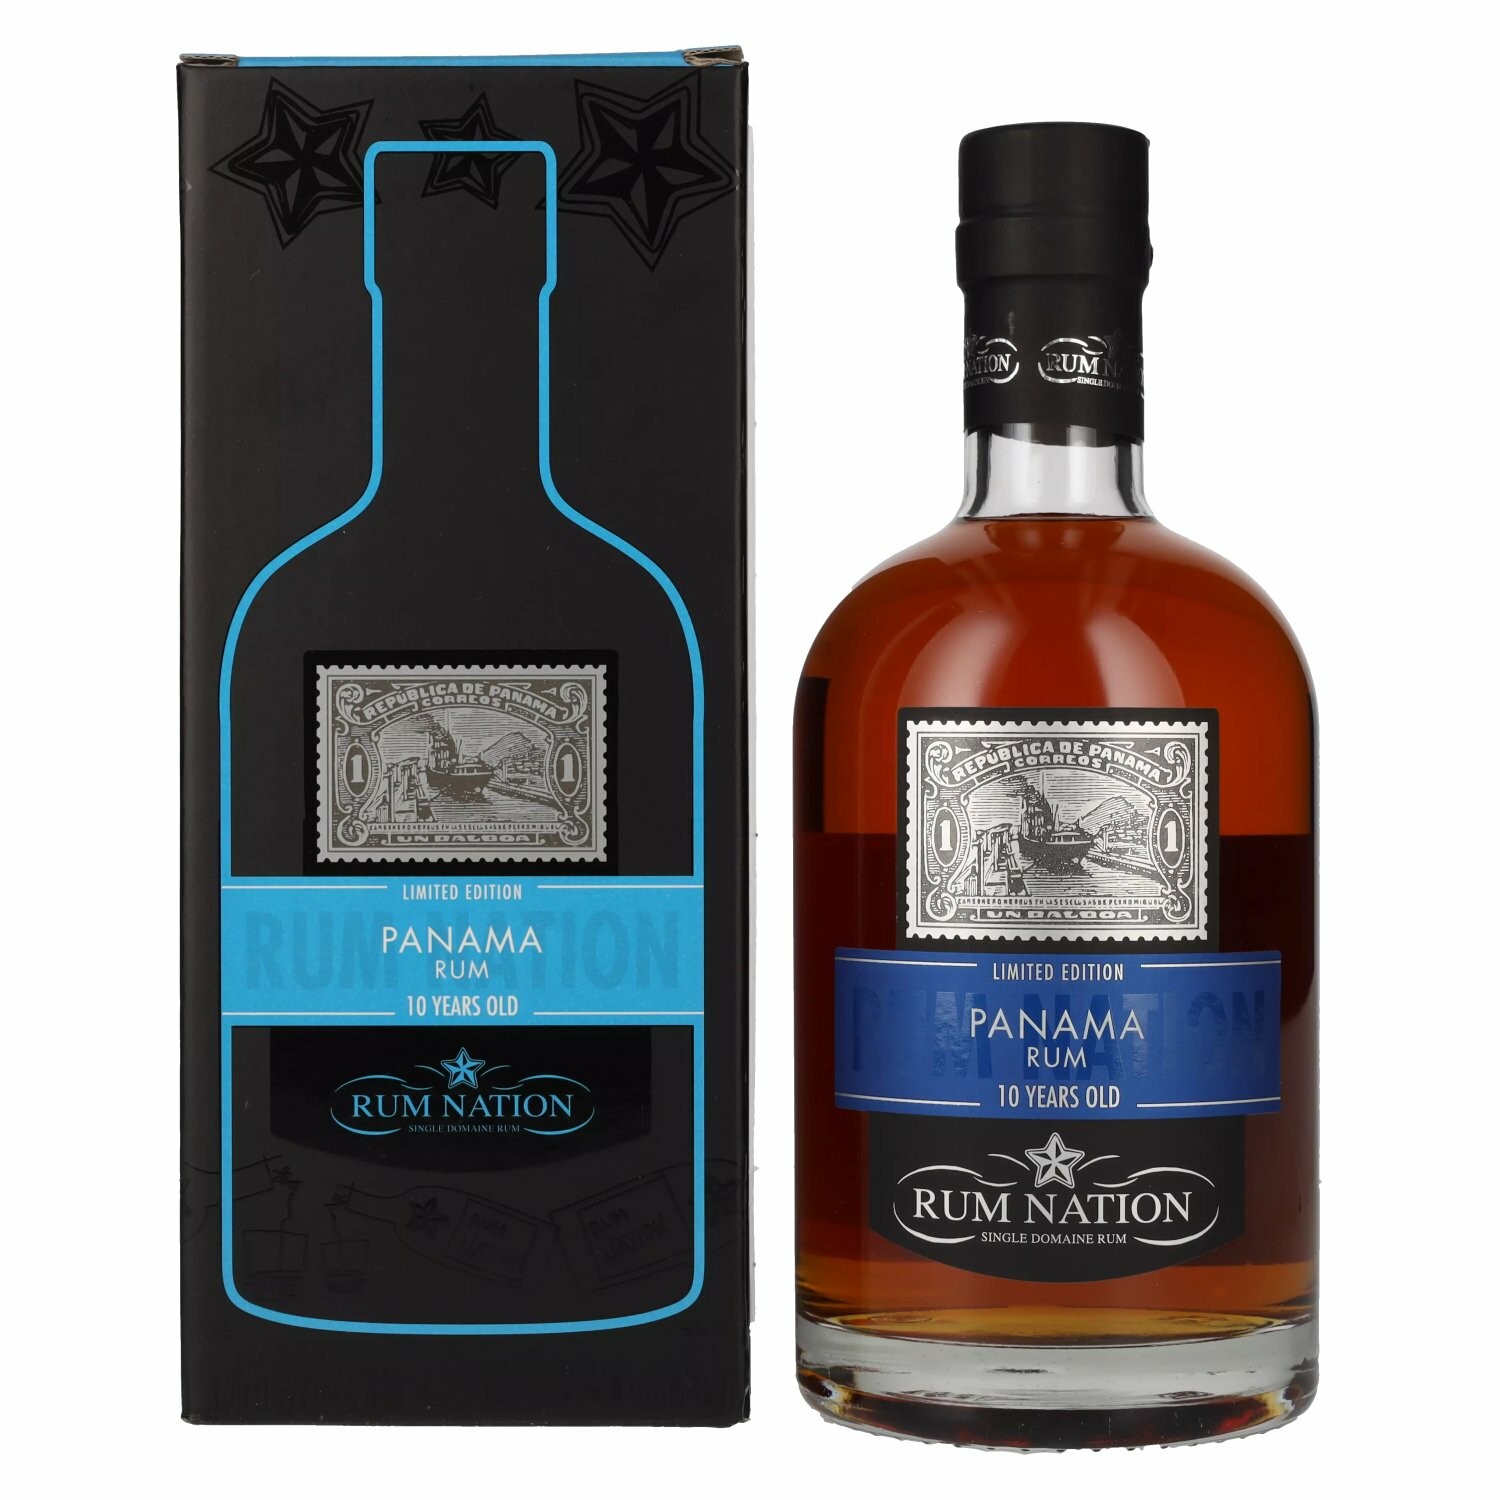 Rum Nation Panama 10 Years Old Limited Edition 40% Vol. 0,7l in Giftbox